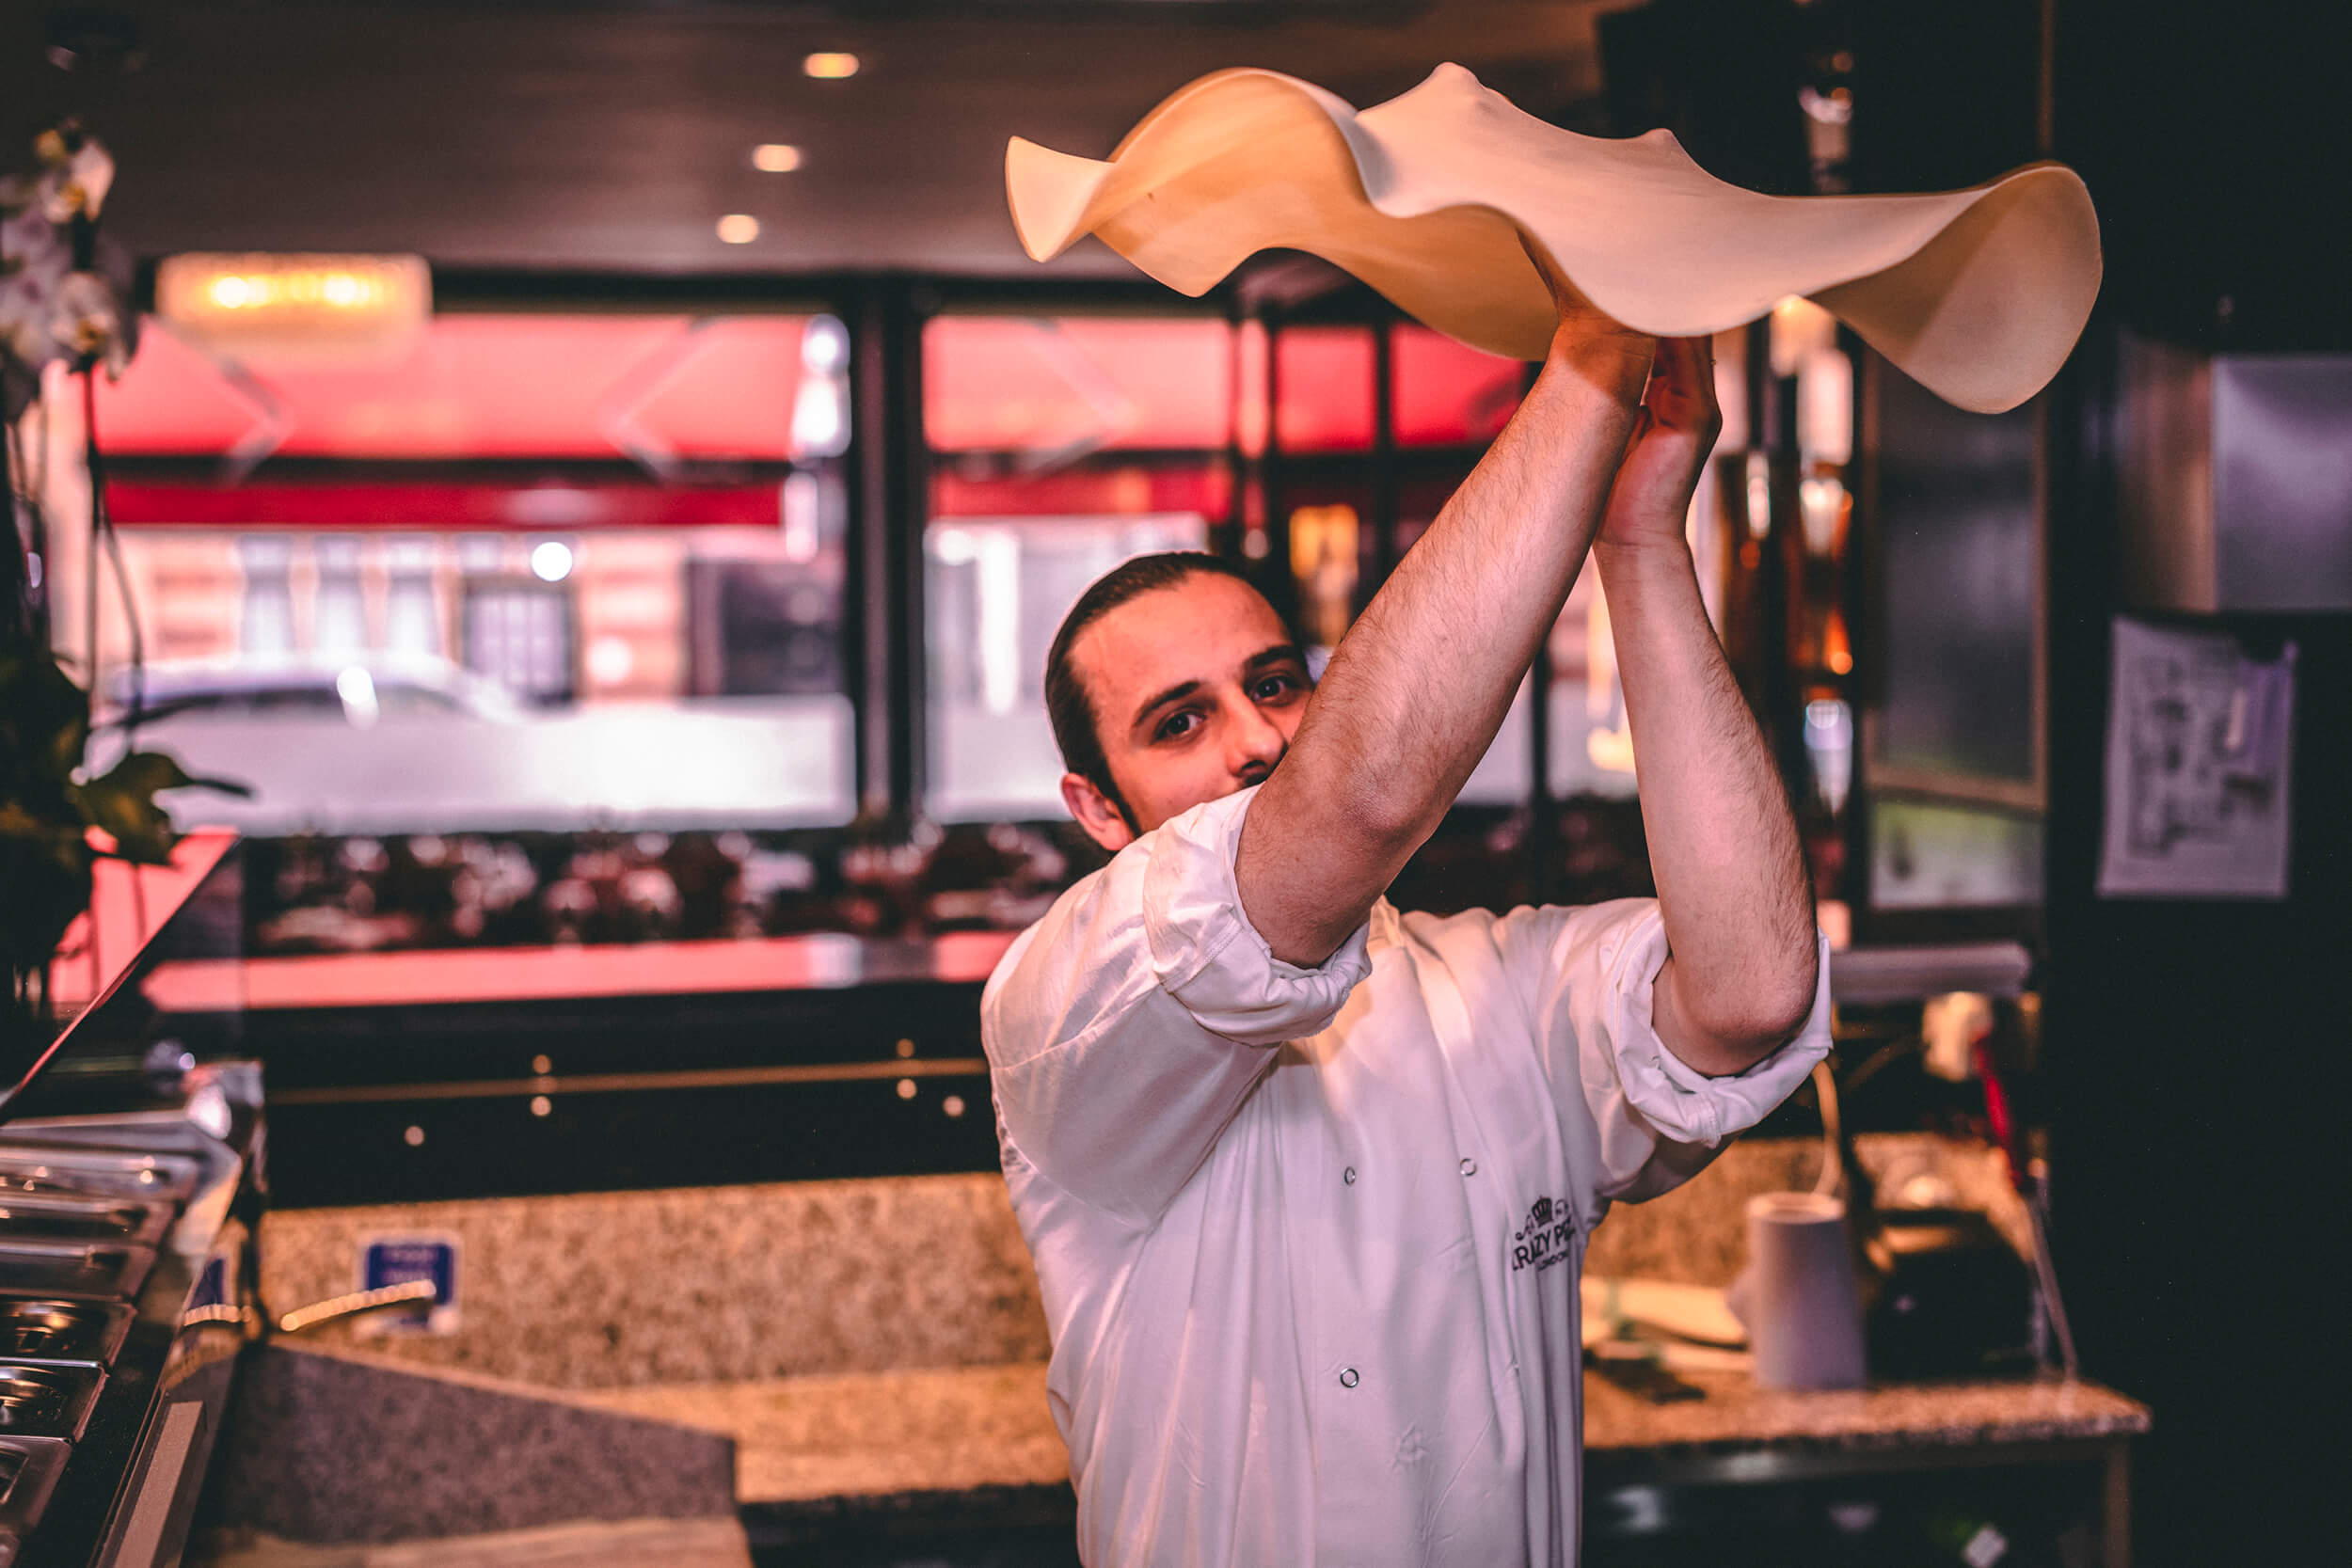 Pizza chef spinning dough.